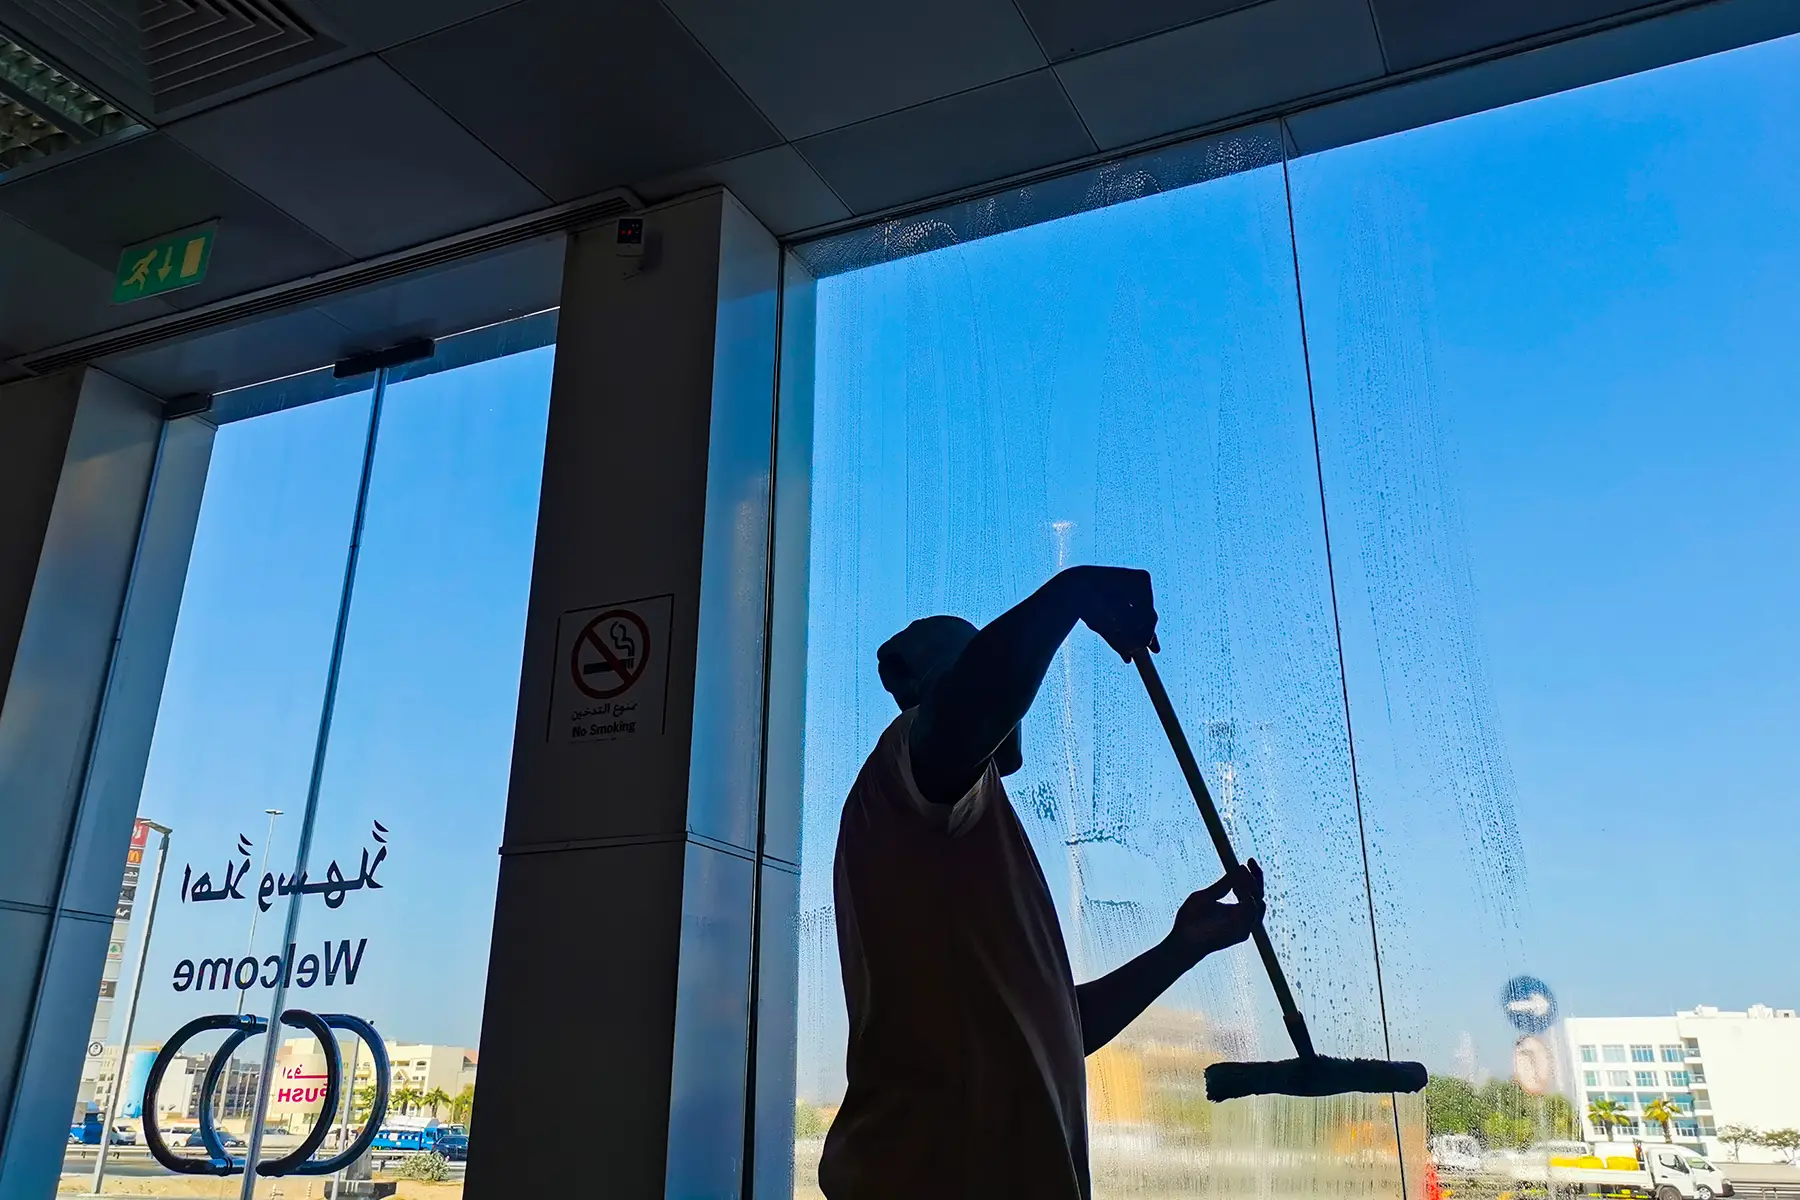 A worker cleaning a window with a wet brush